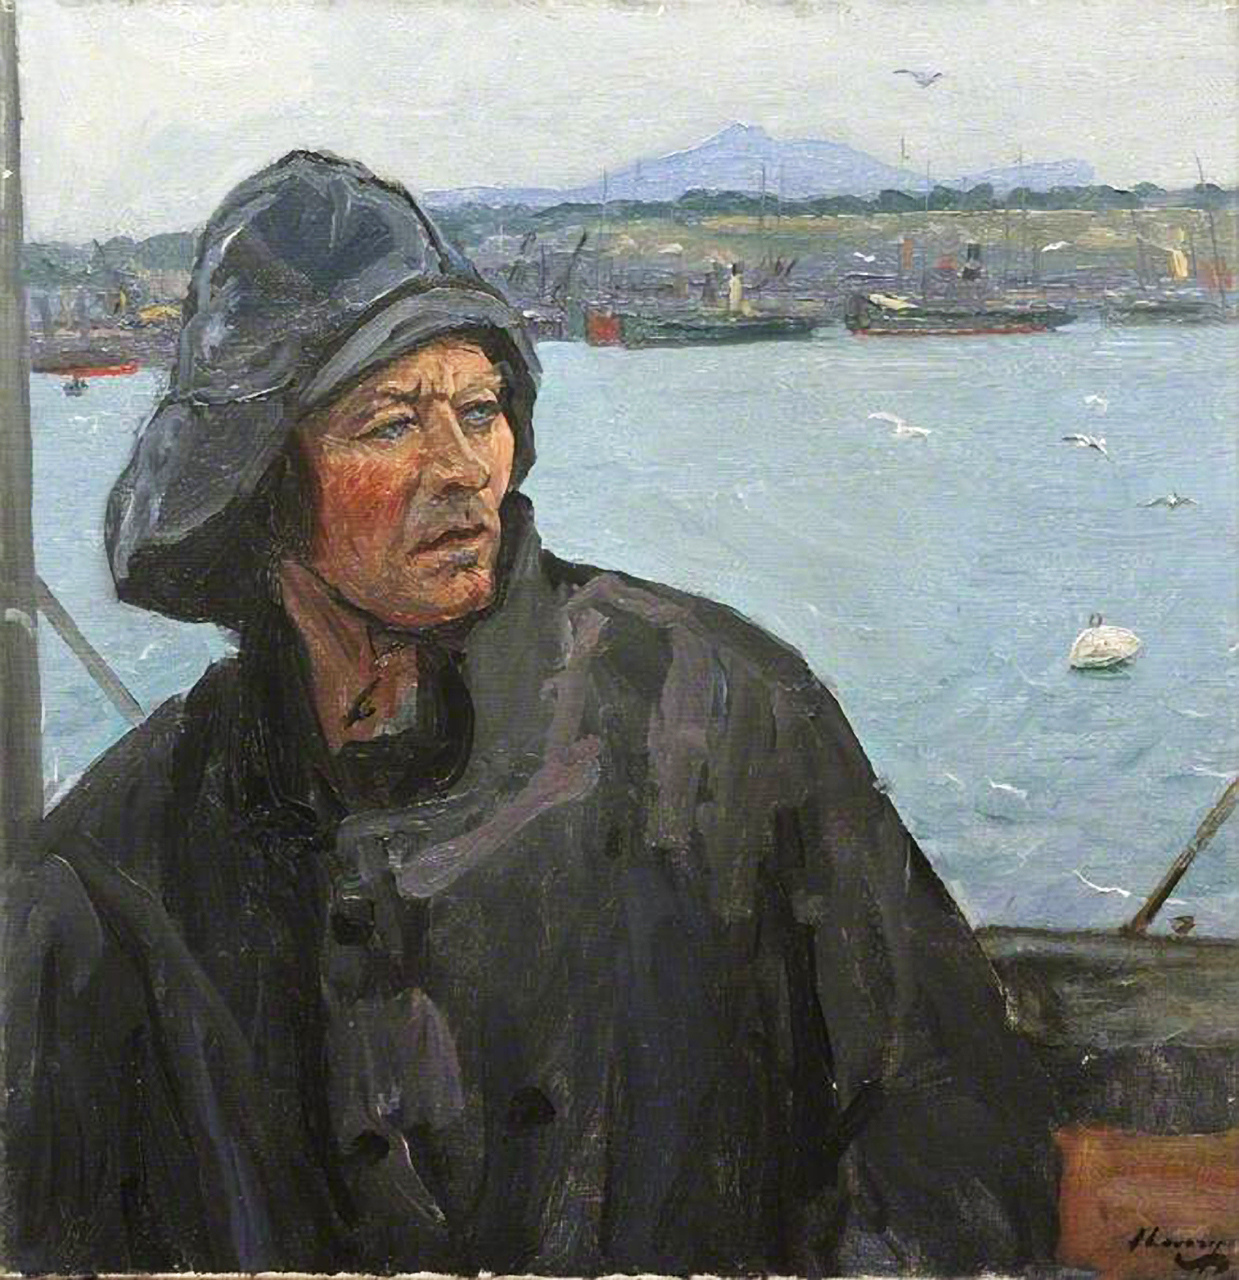 A seafarer on a boat looking to his left with a view of the dock behind him